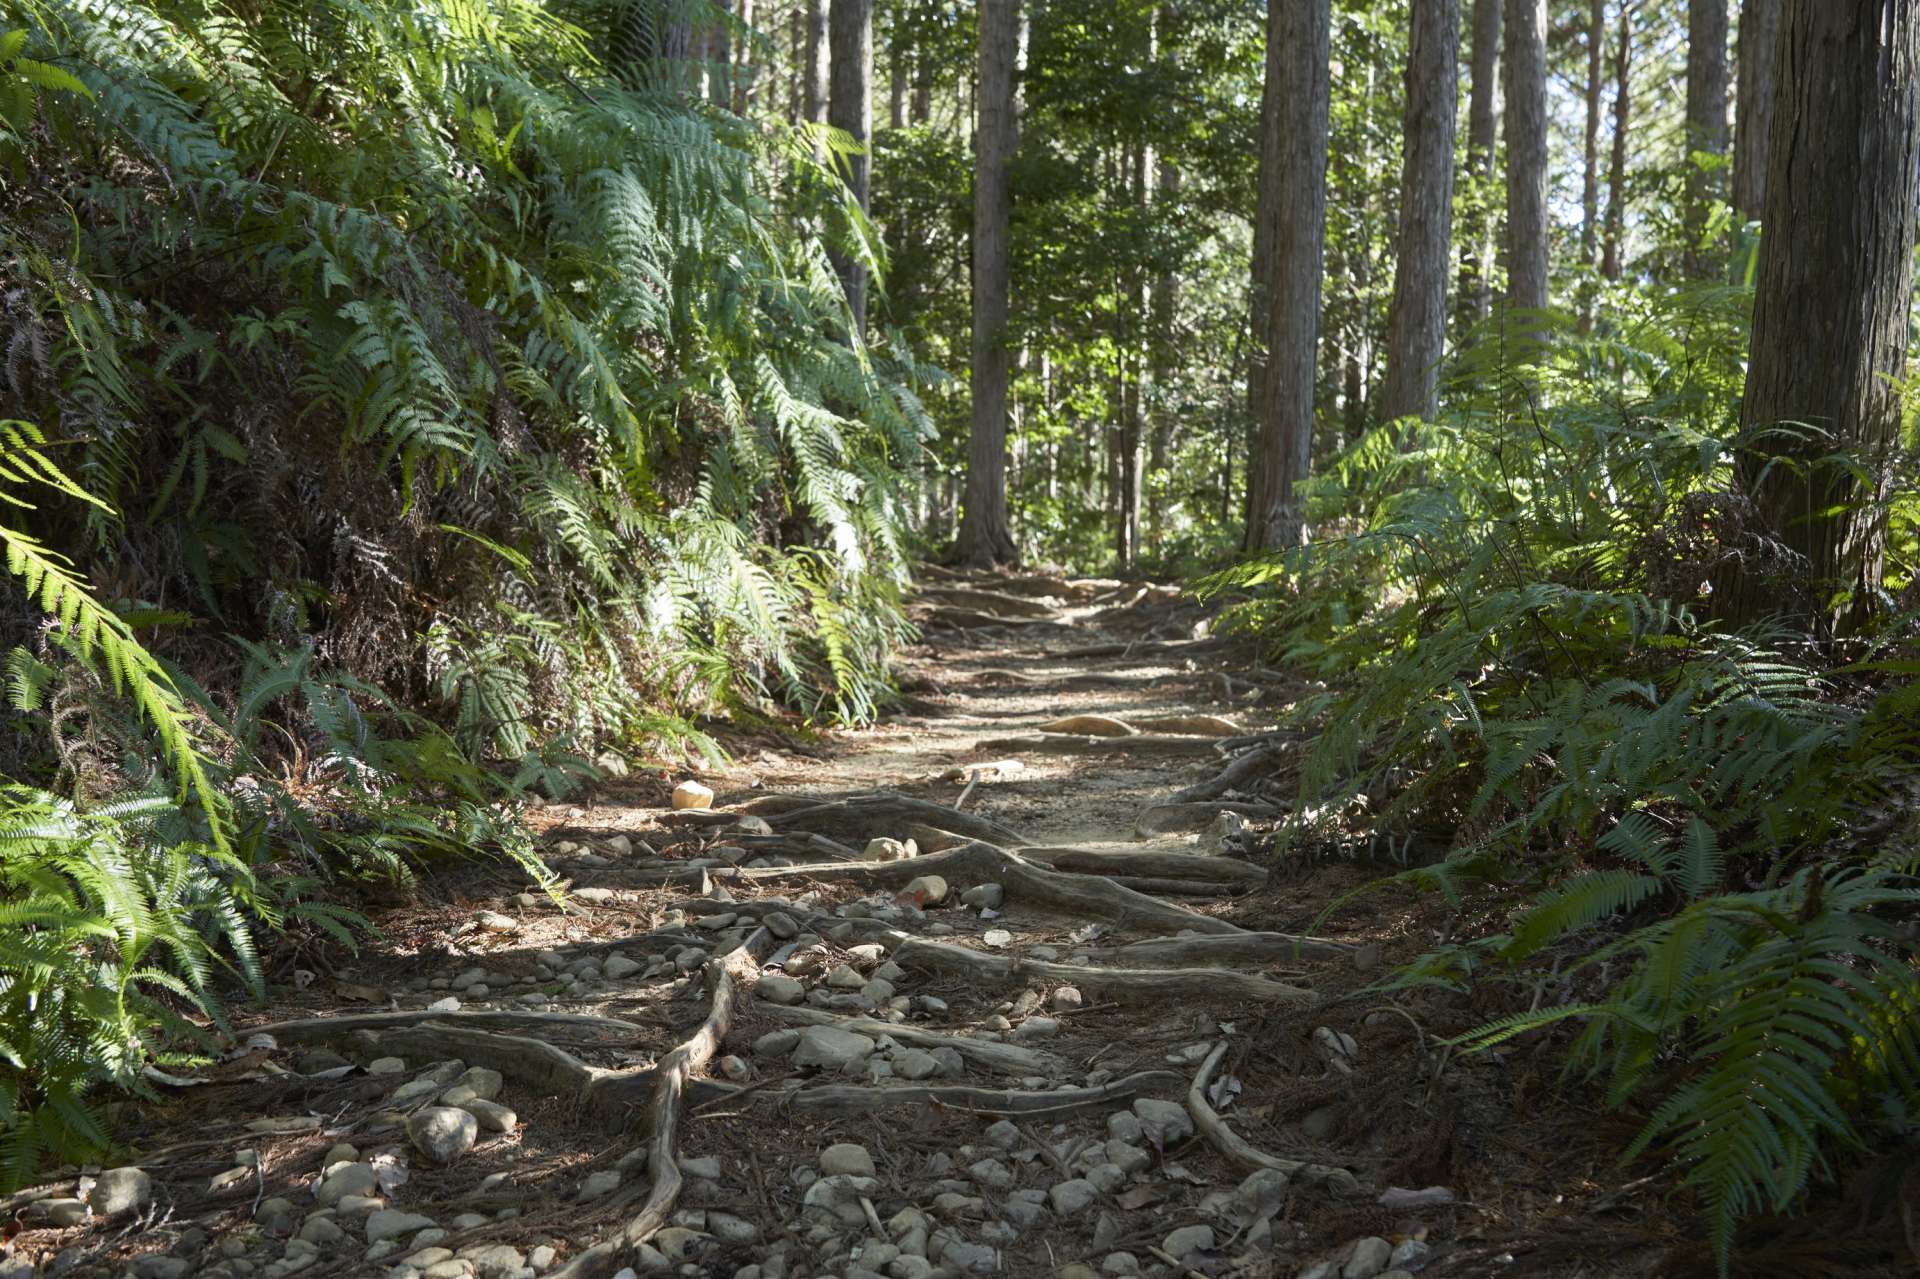 The Kumano Kodo is a pilgrimage route still active in the mountains of Kumano. Over its 1000-year history an imaginable number of pilgrims have walked these serene paths.